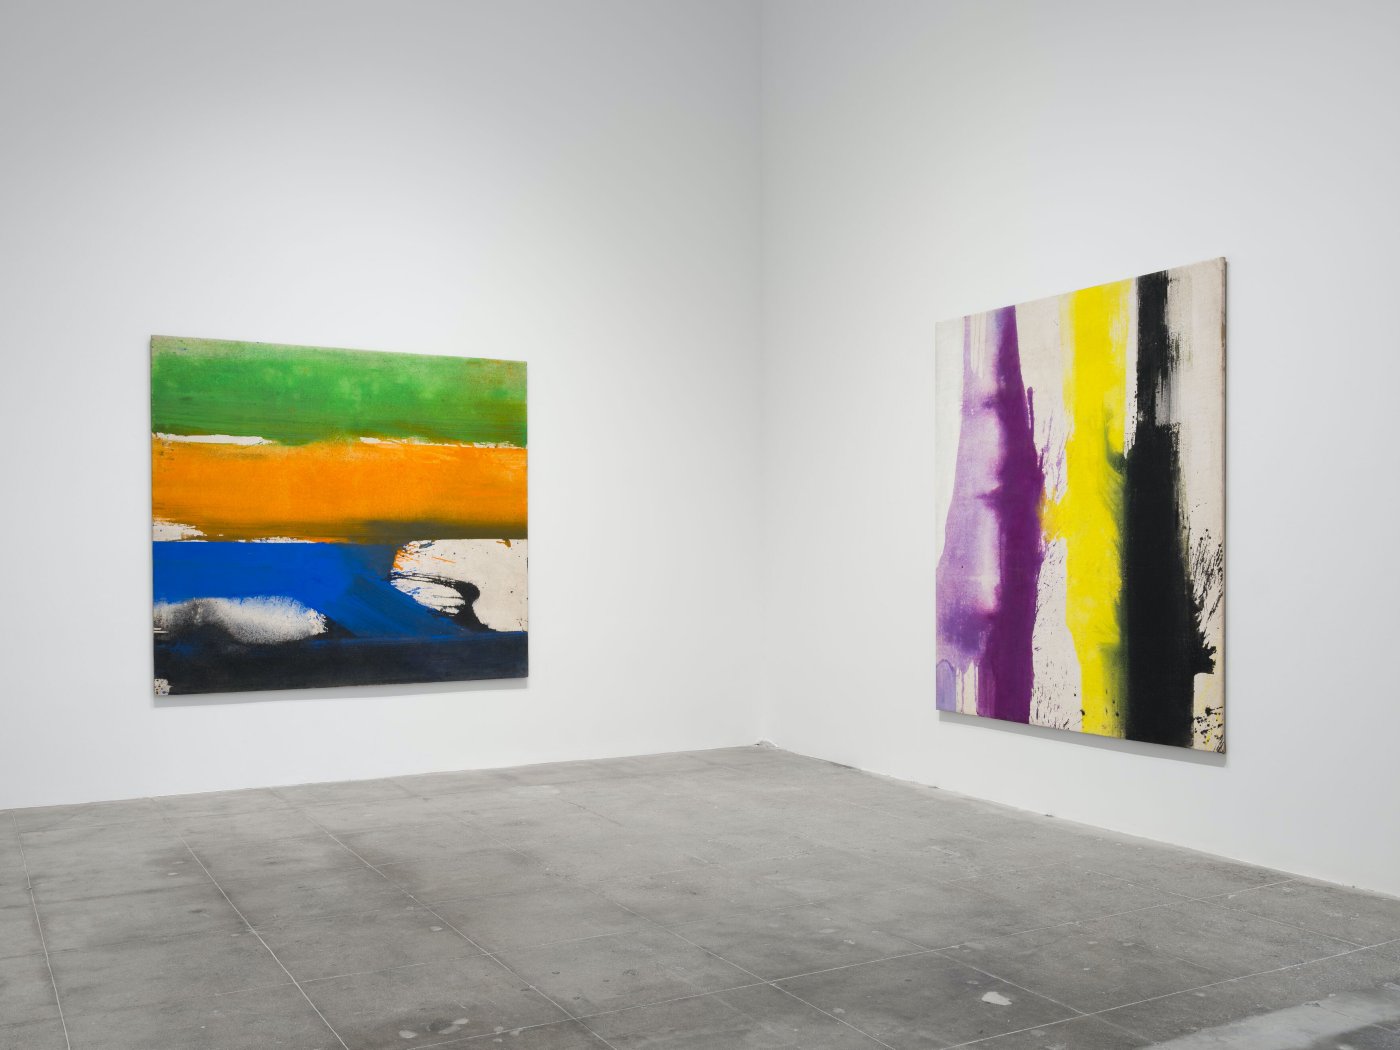 Installation image for Ed Clark: Expanding the Image, at Hauser & Wirth